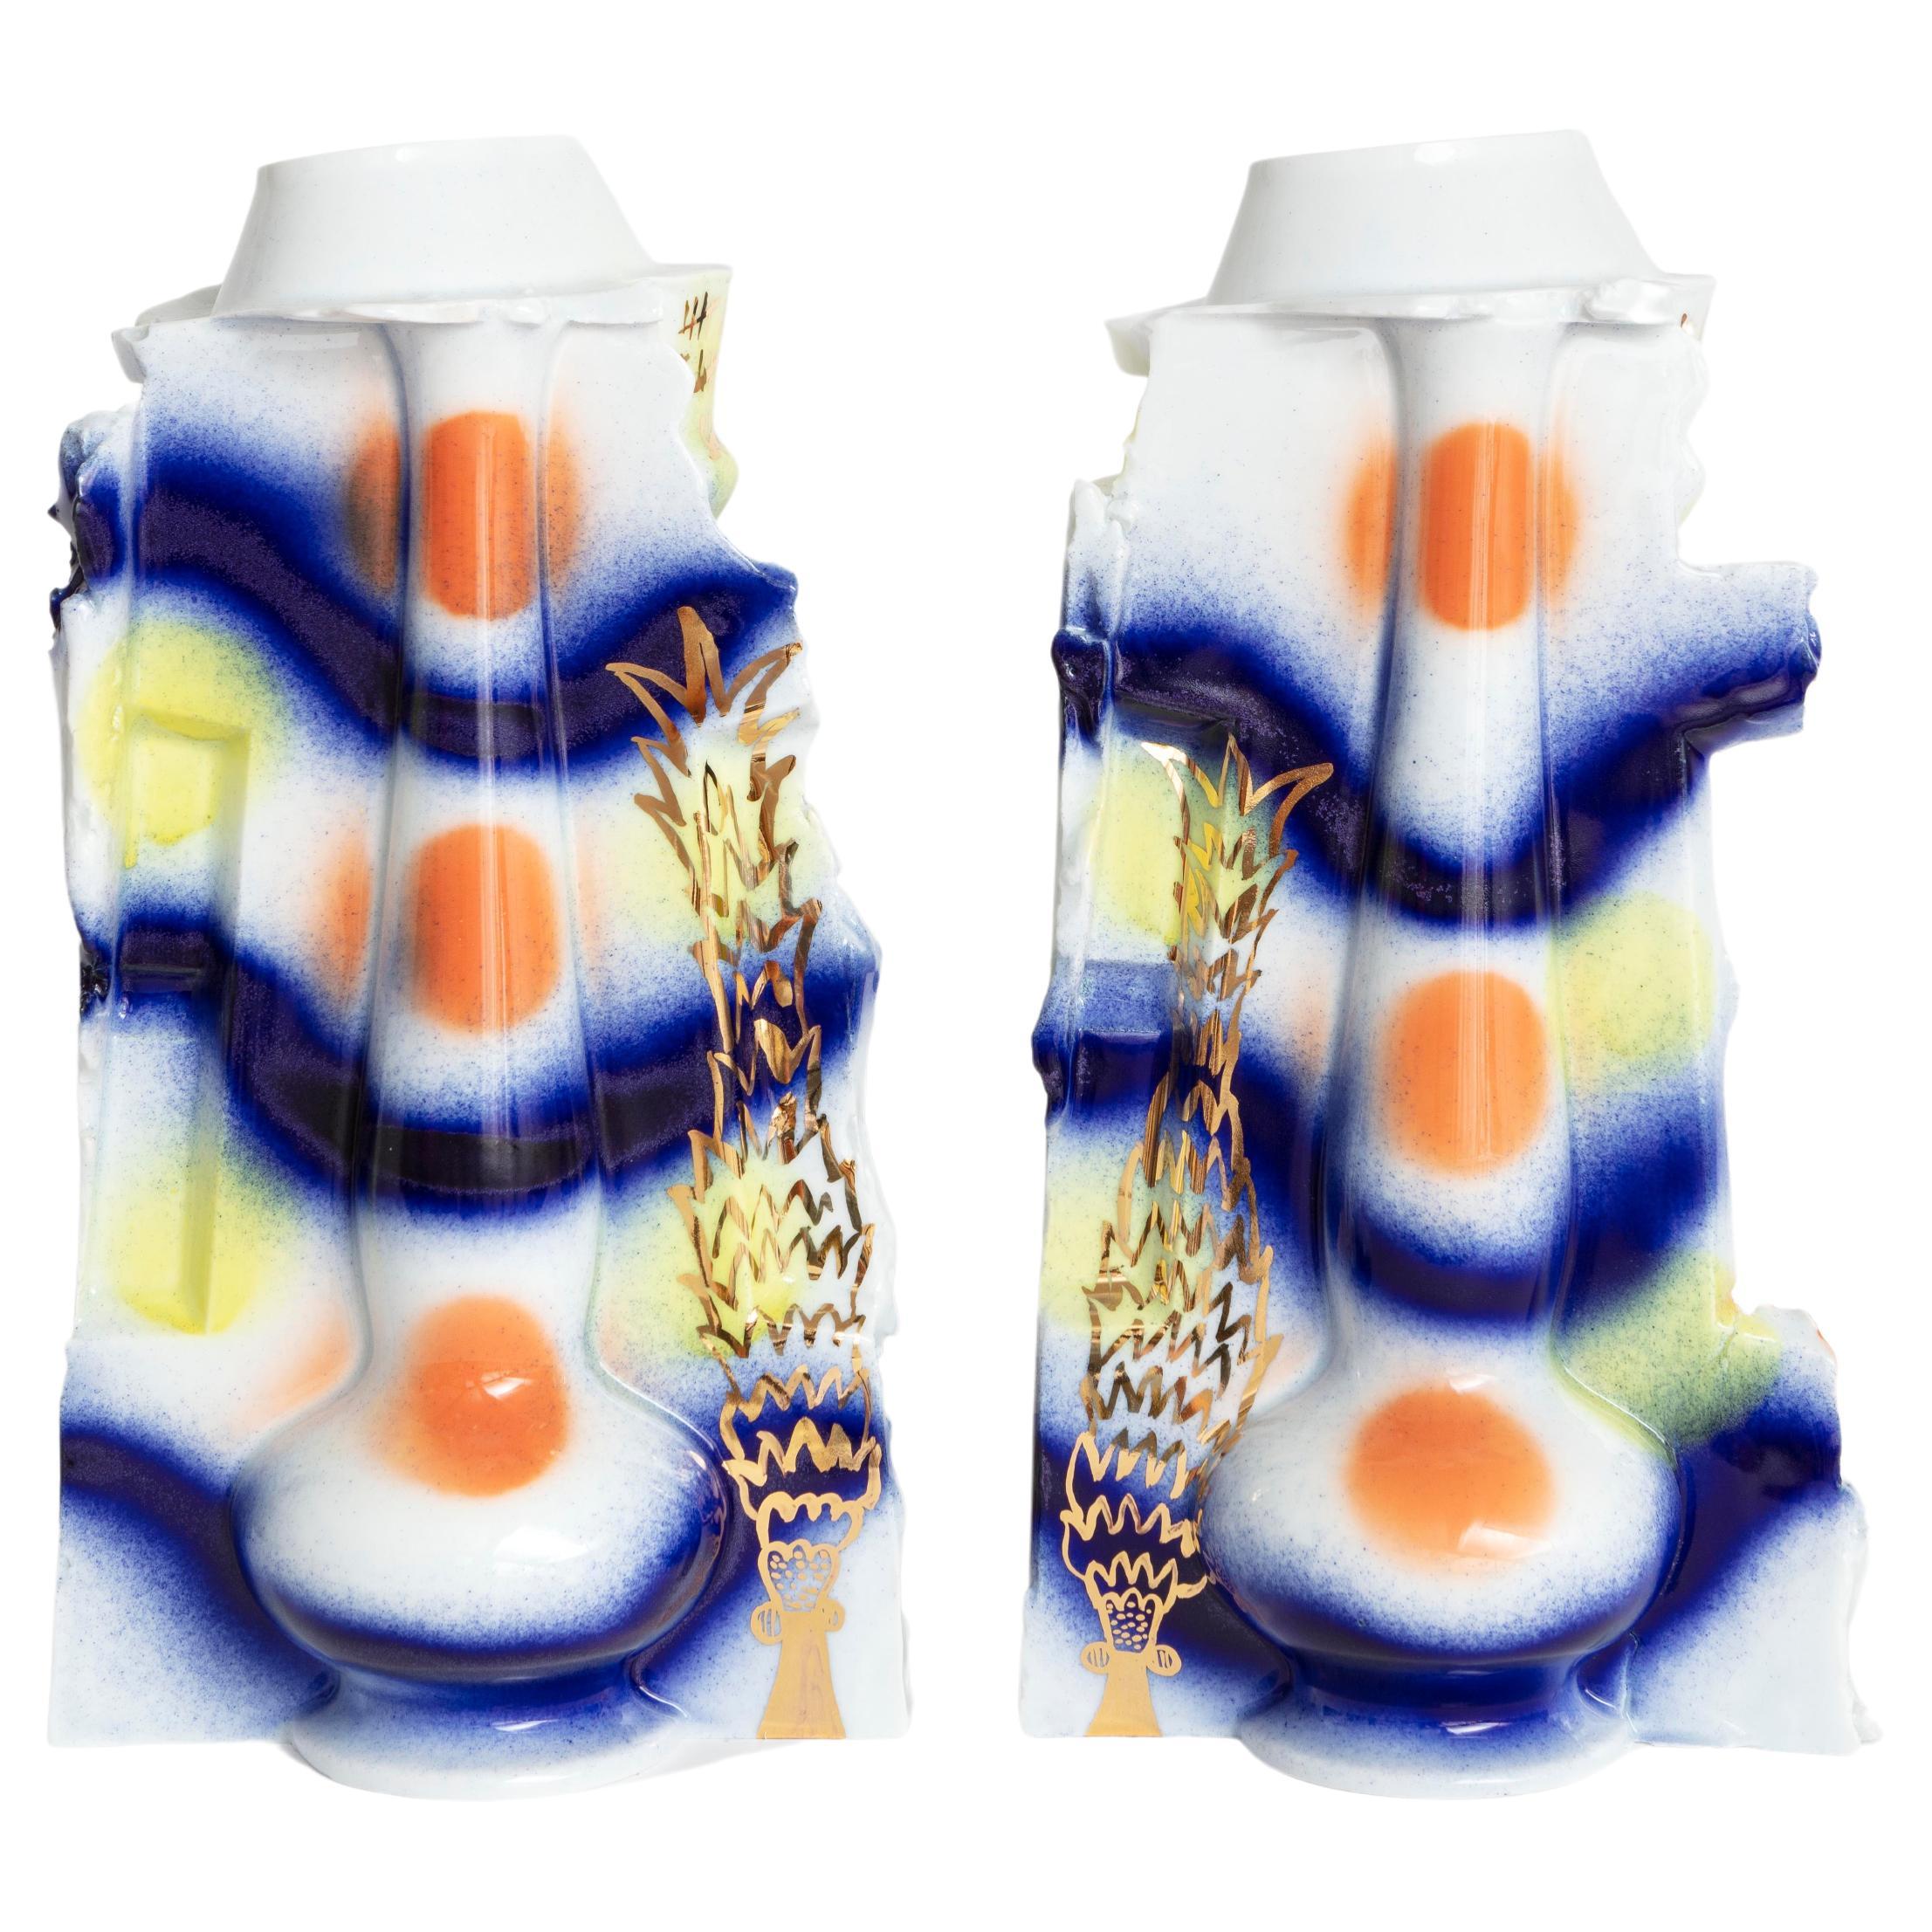 "Beach party" decorated enameled porcelain vase, serie of 2 For Sale